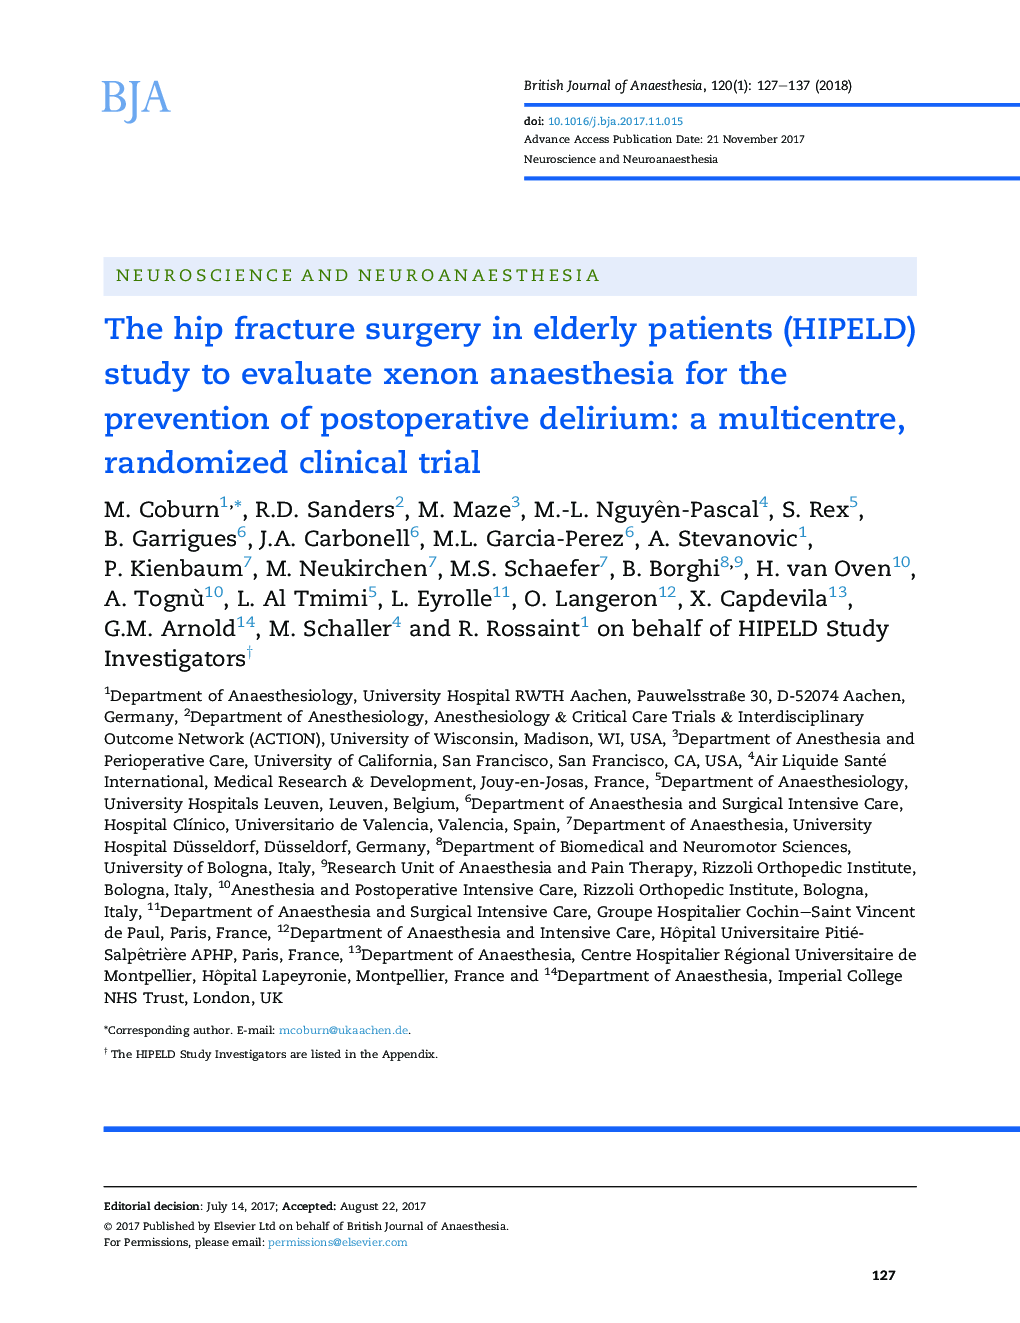 The hip fracture surgery in elderly patients (HIPELD) study to evaluate xenon anaesthesia for the prevention of postoperative delirium: a multicentre, randomized clinical trial